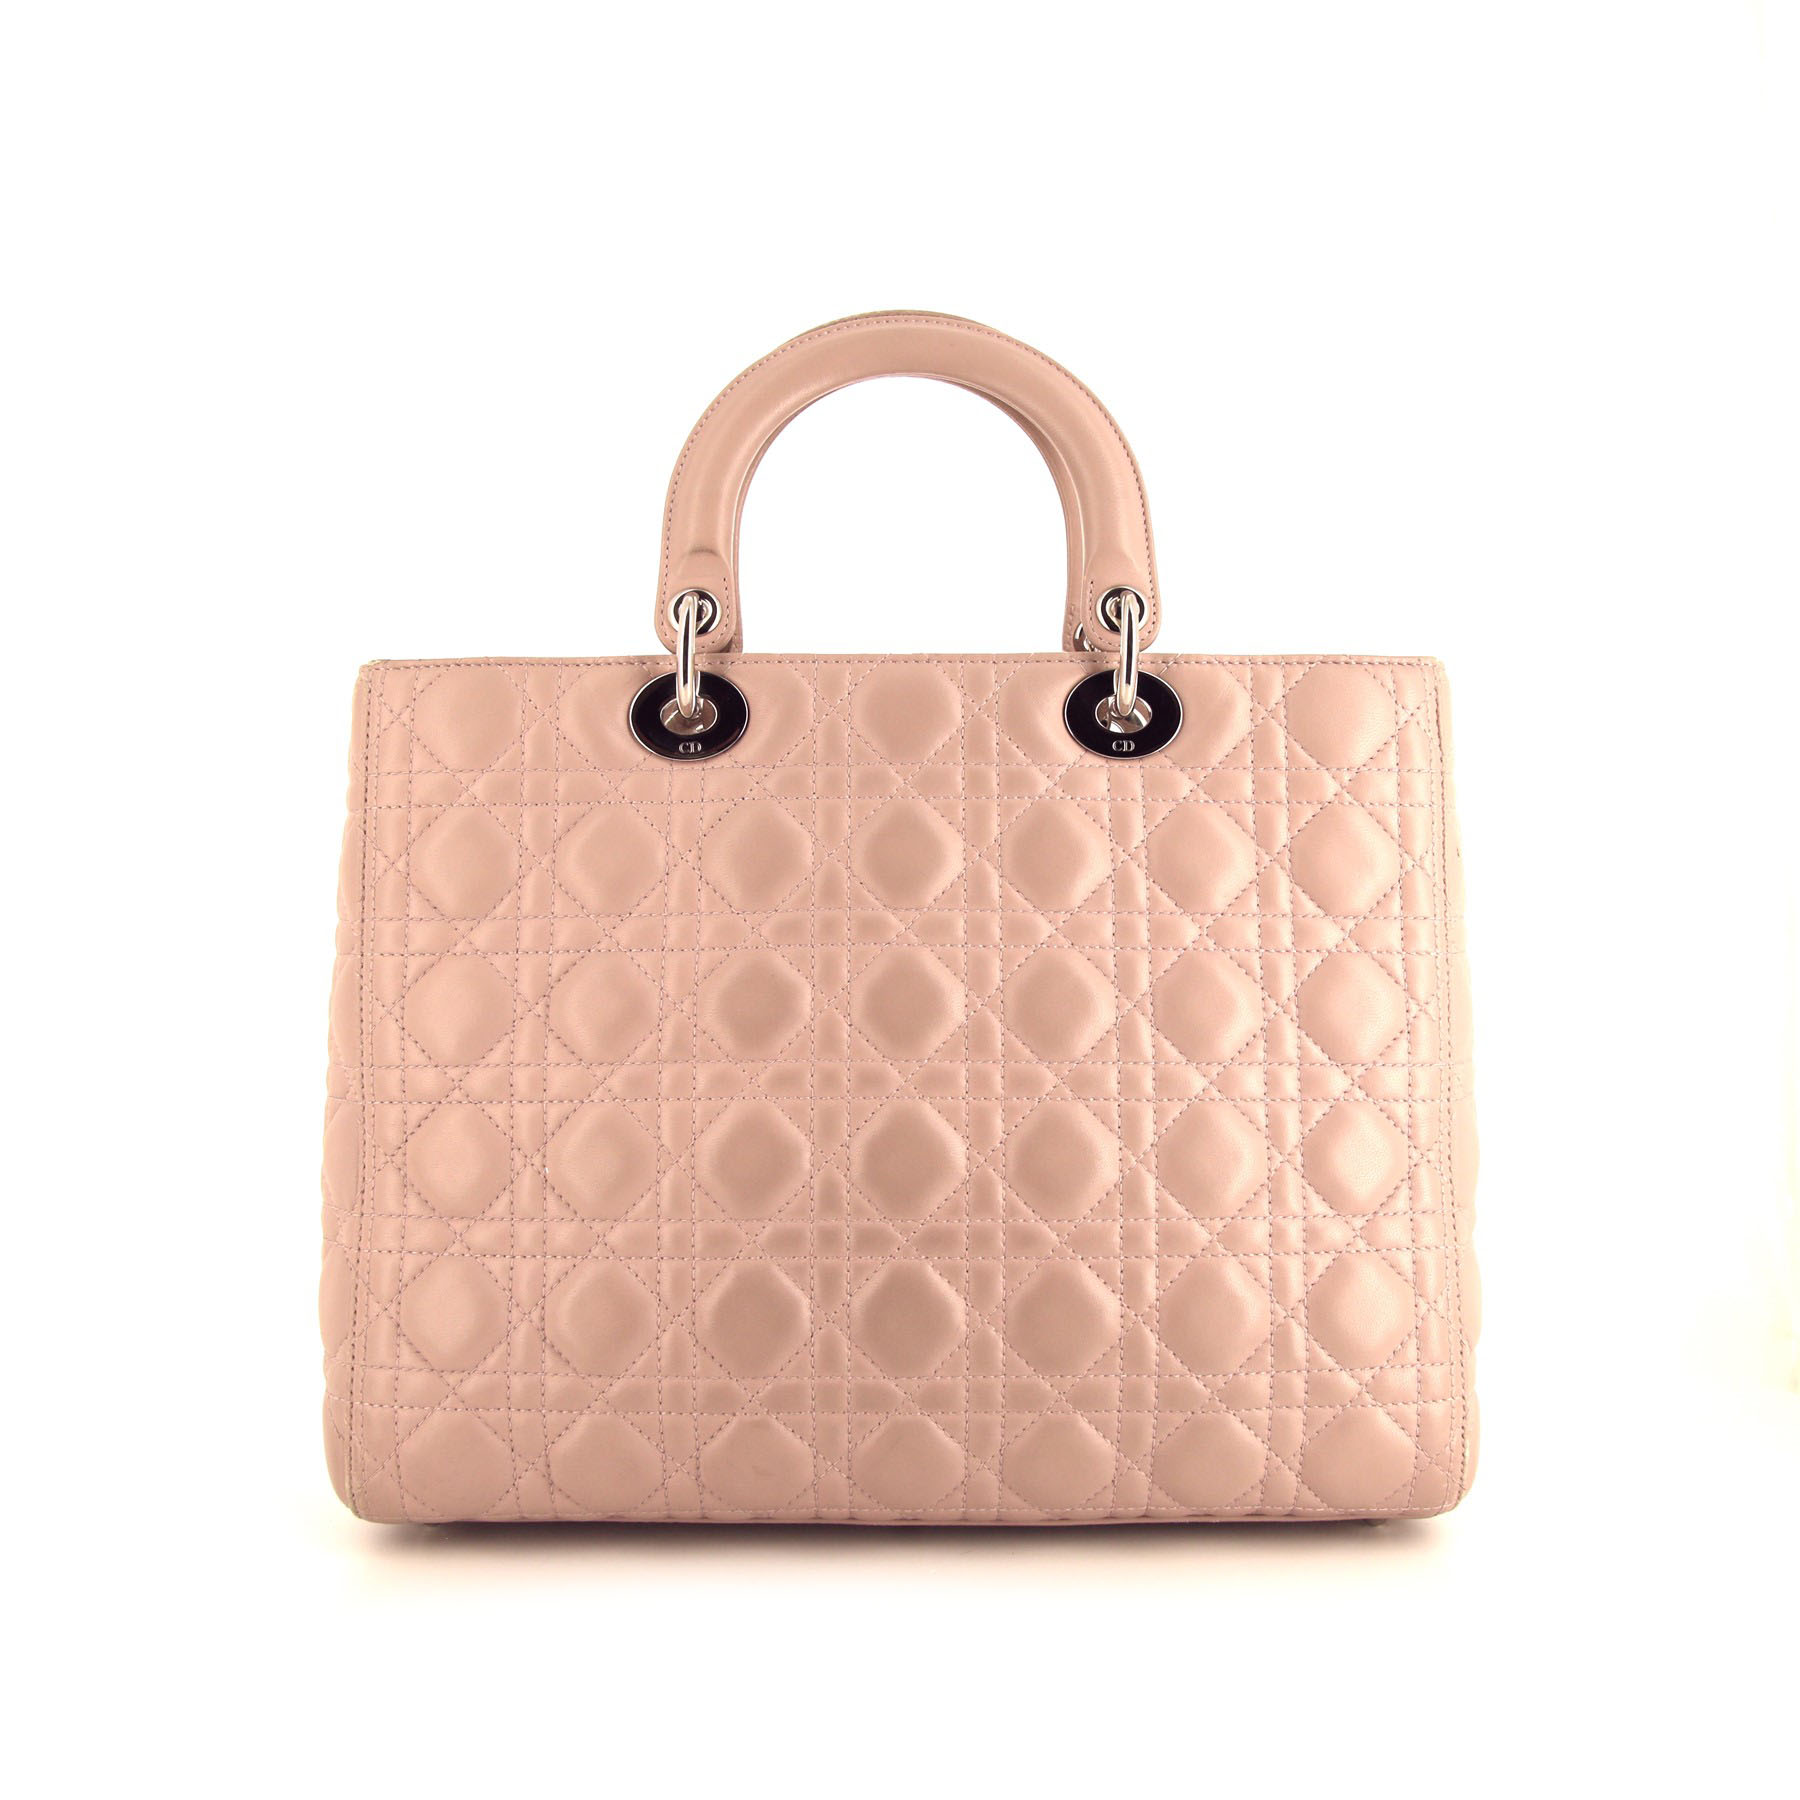 Lady Dior Large Model Handbag In Pink Leather Cannage